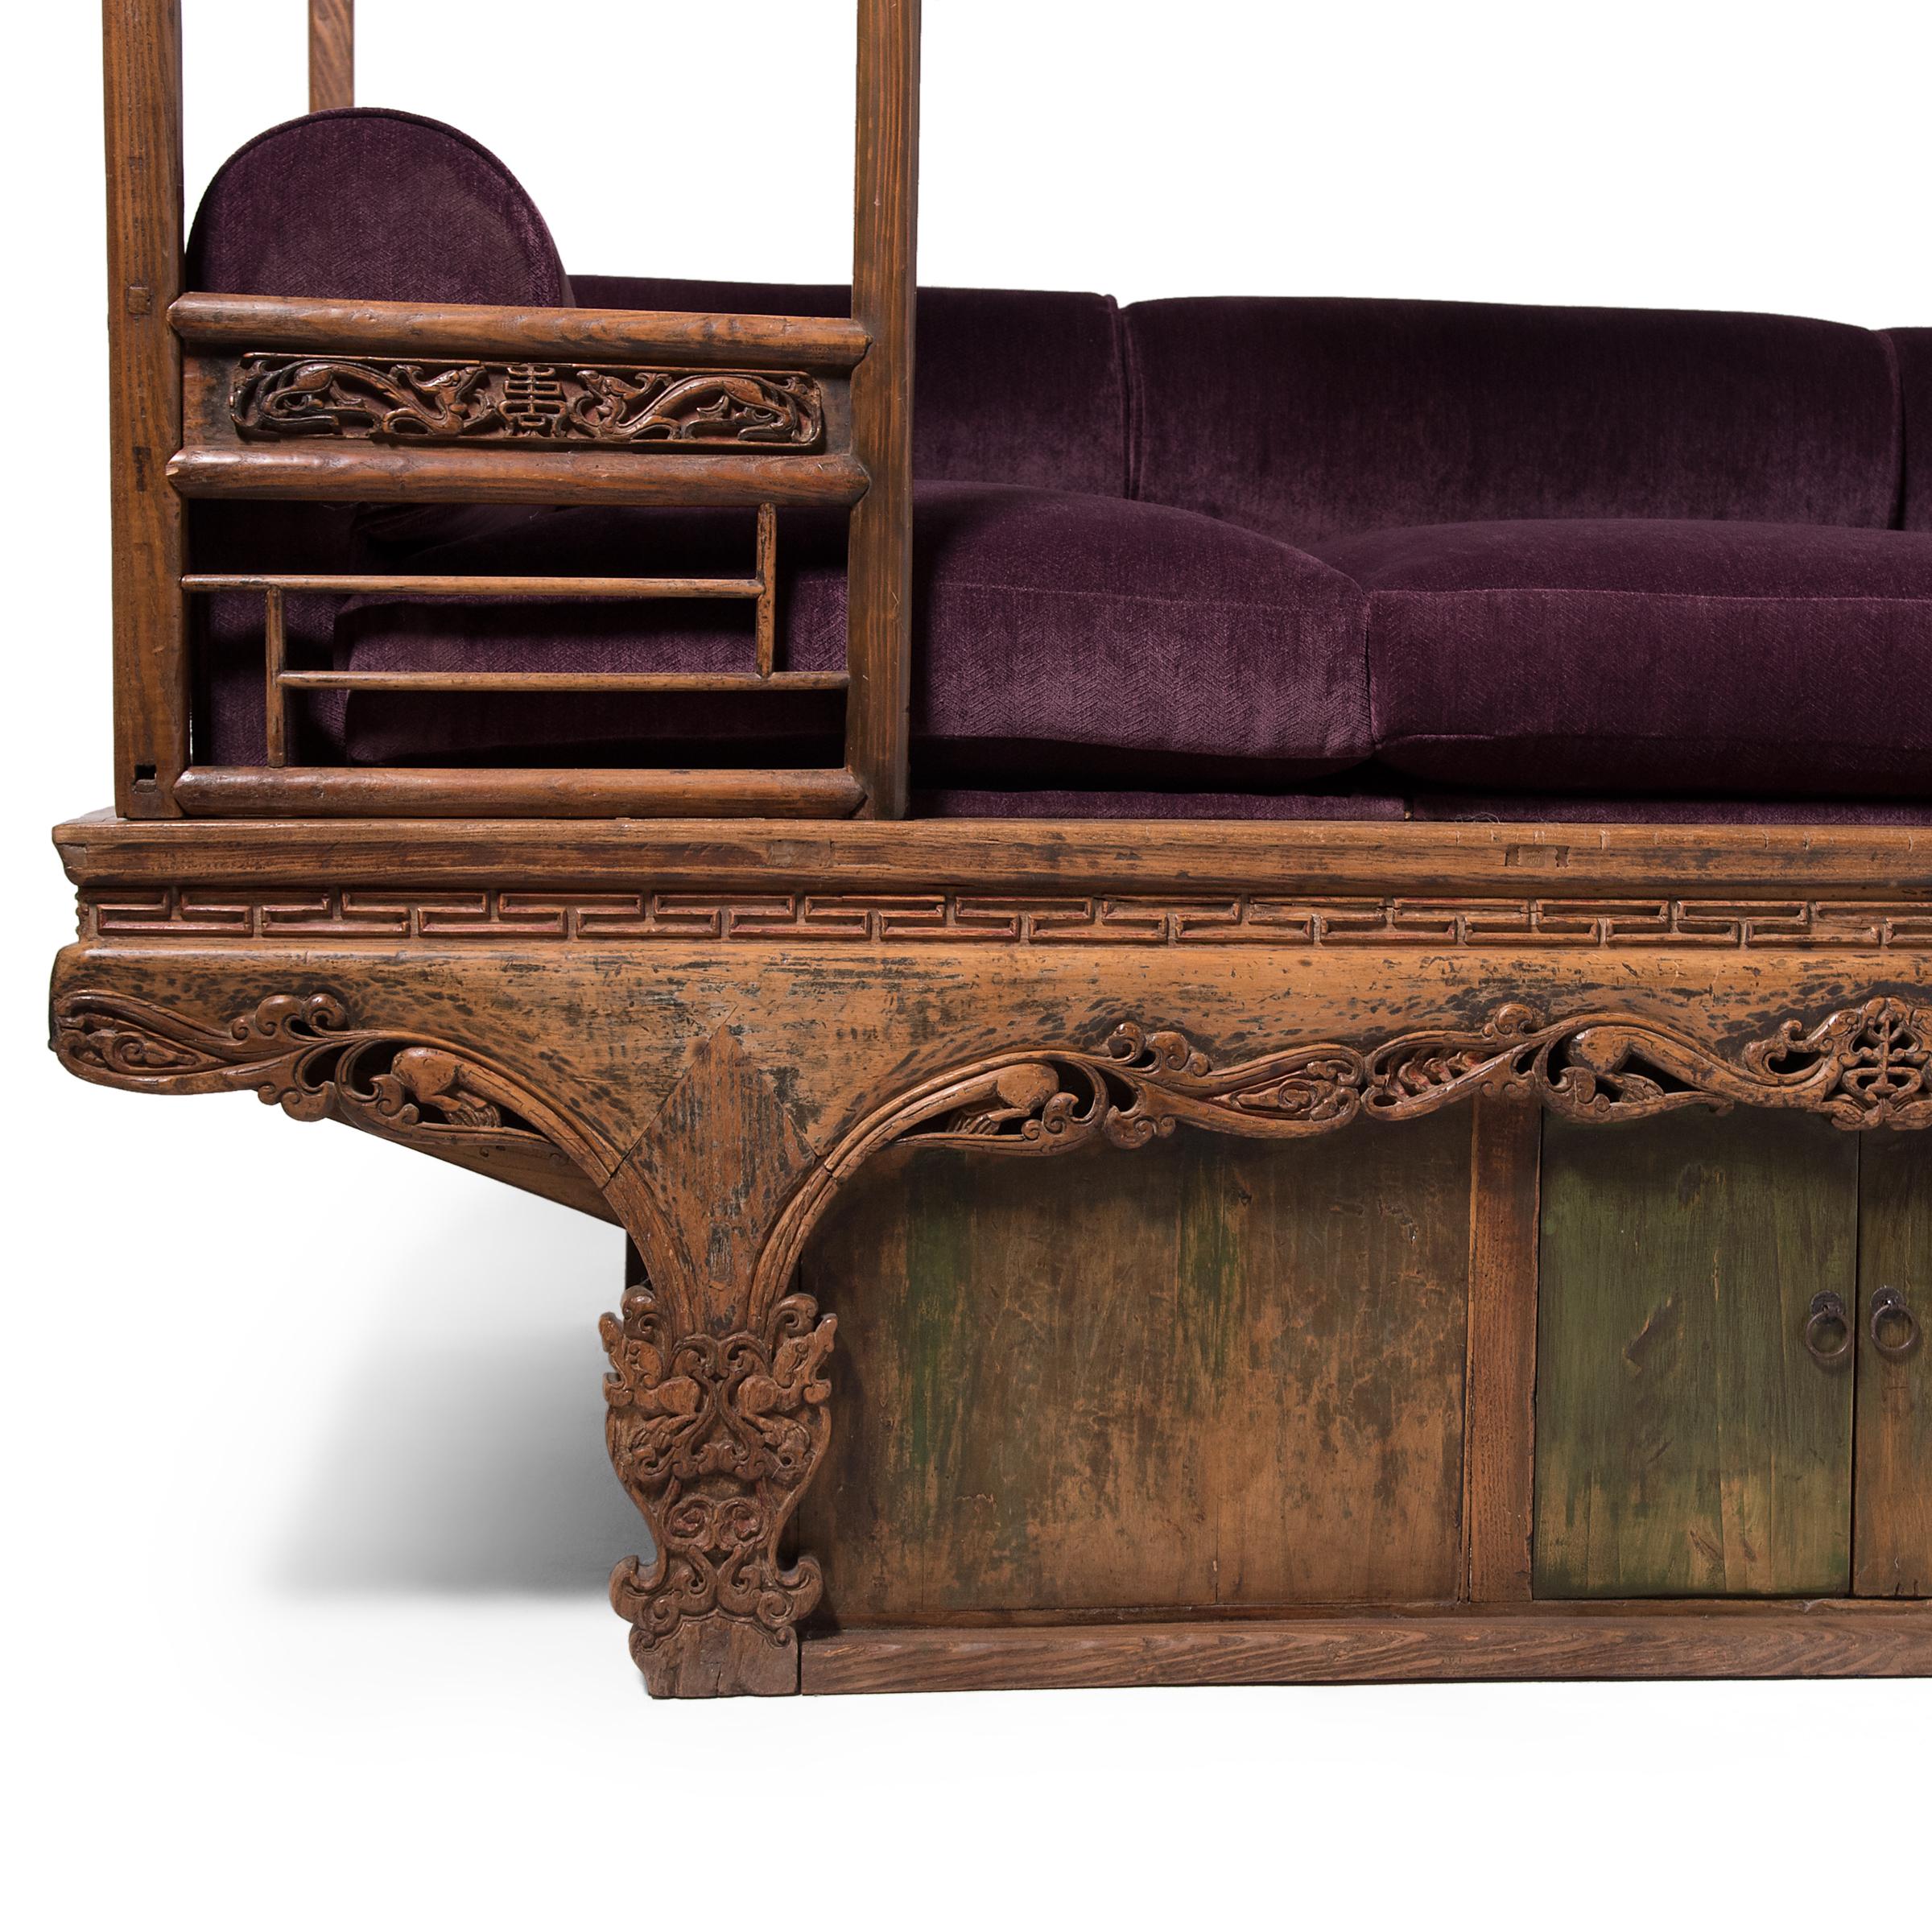 18th Century Ornate Chinese Canopy Bed, c. 1750